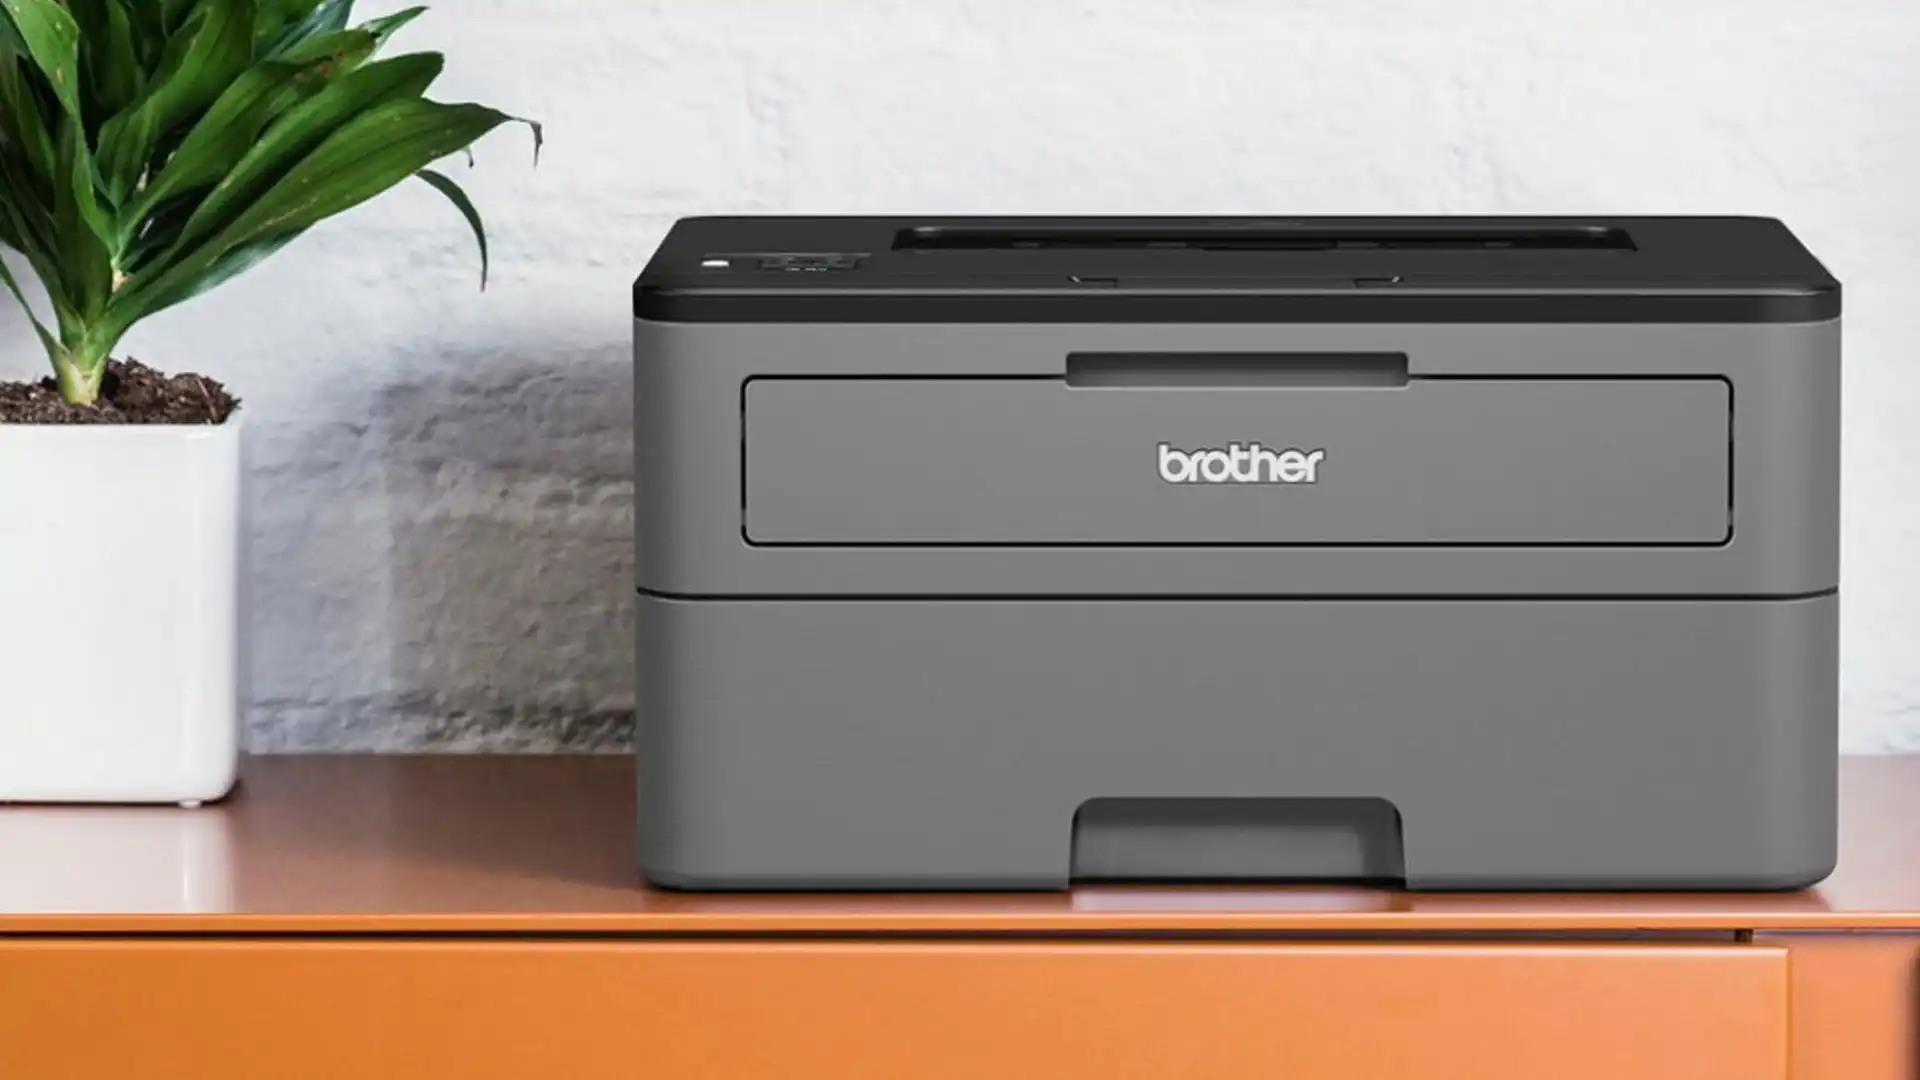 How Can You Connect a Brother Printer to WiFi